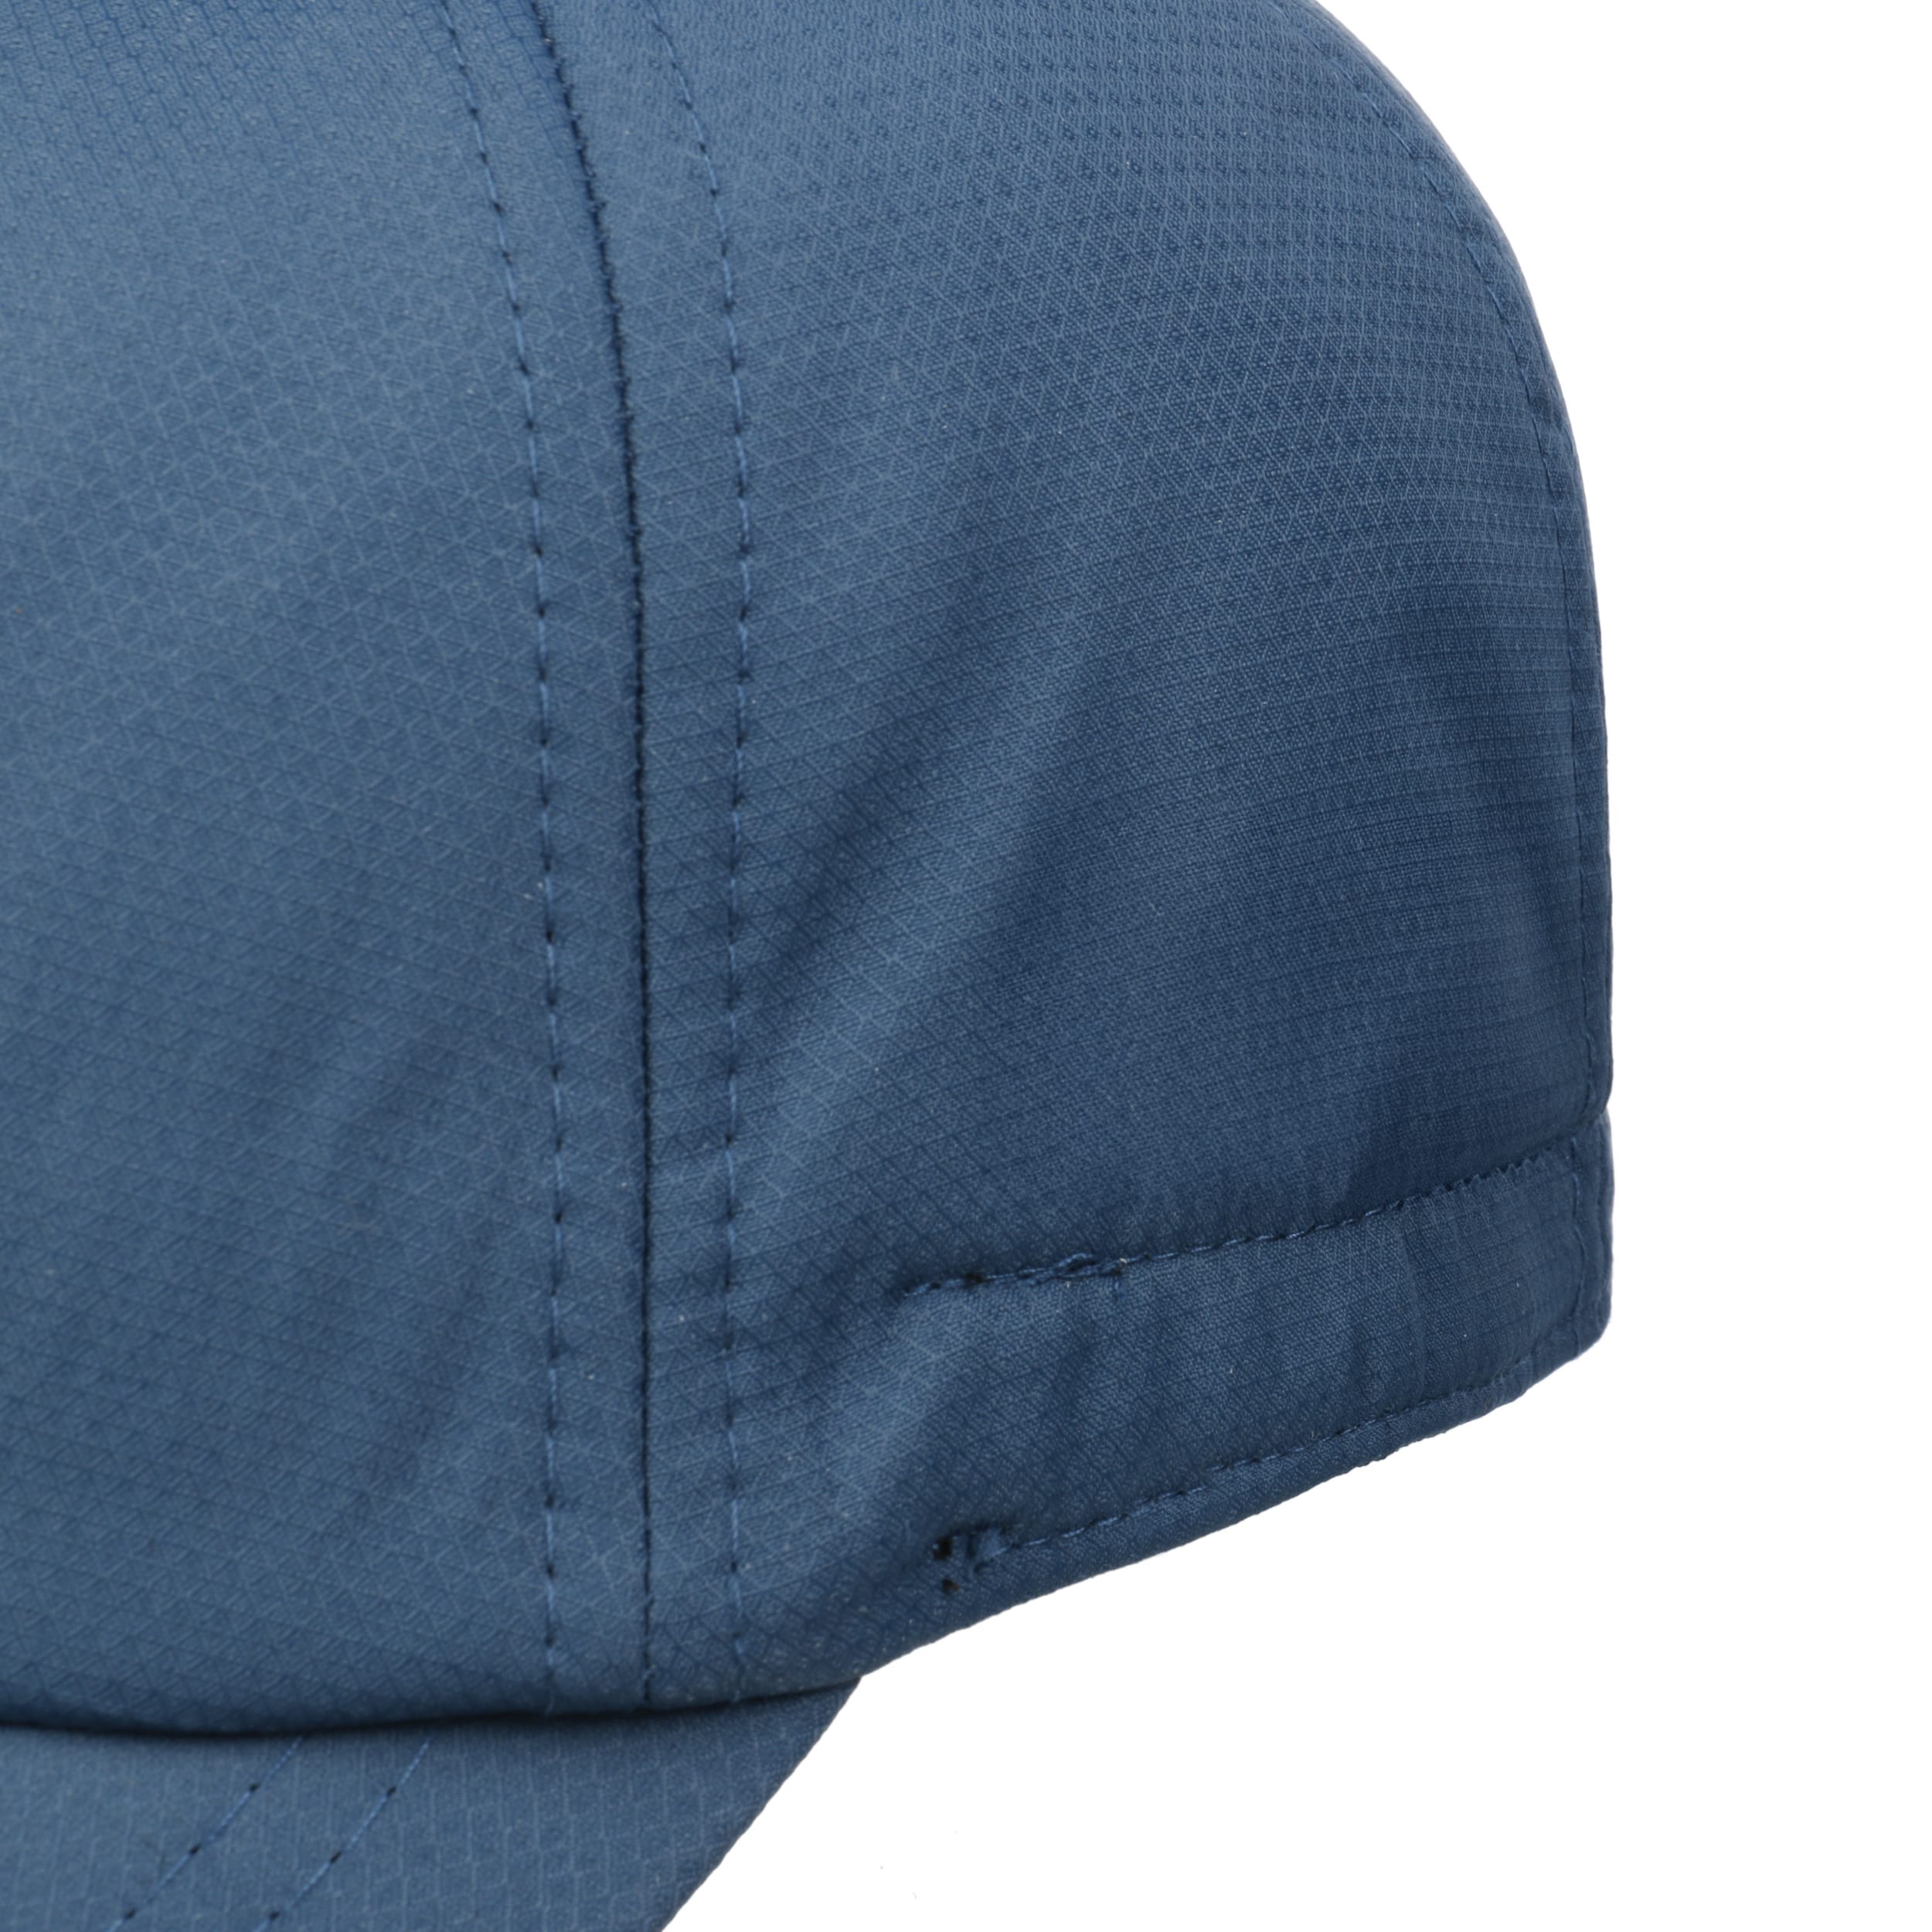 3M Thinsulate Cap mit Ohrenklappen by Lipodo - 29,95 €